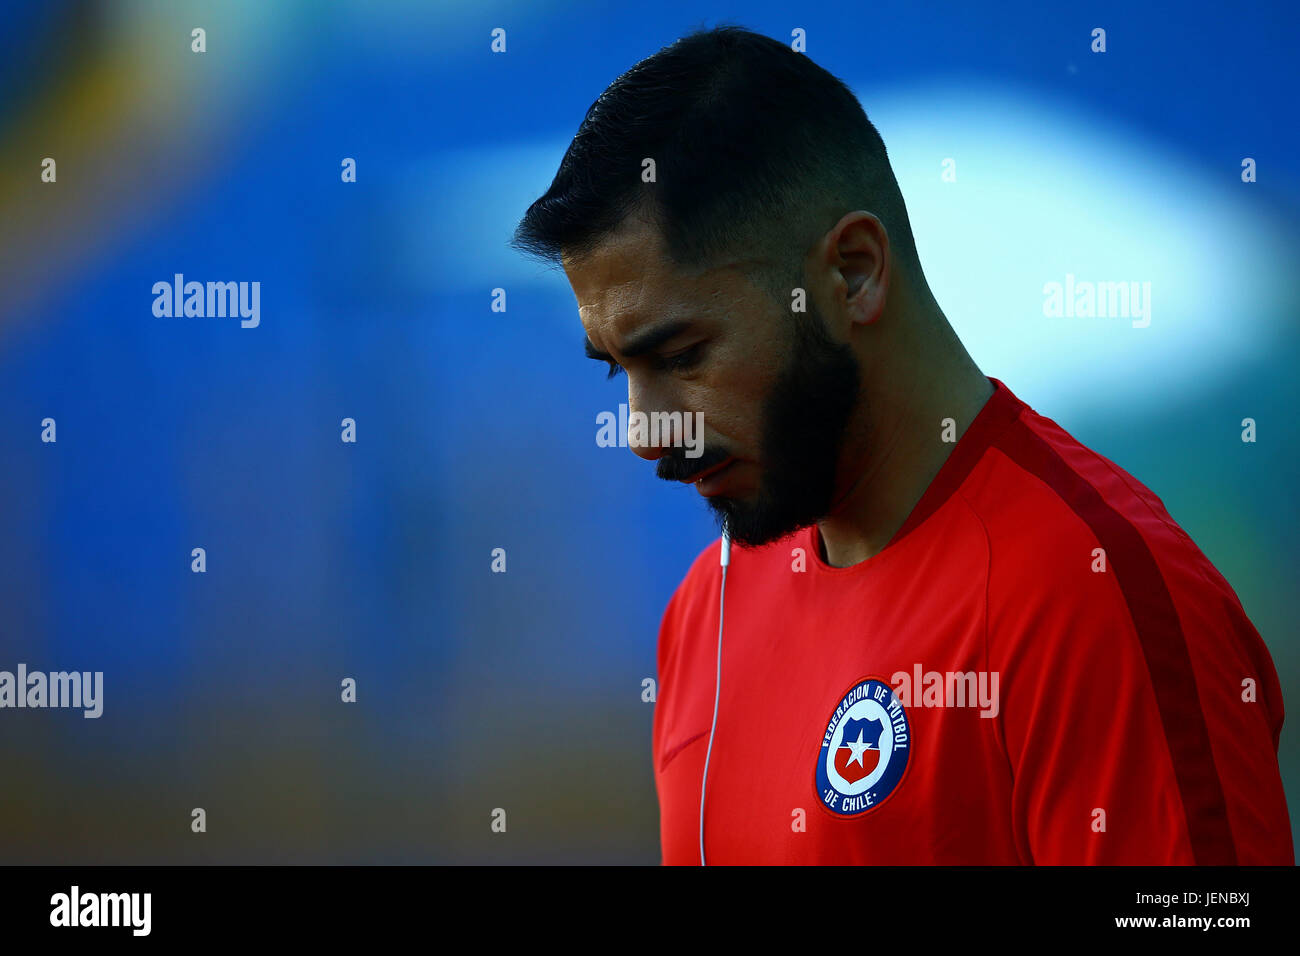 KAZAN, RT - 27.06.2017: CHILEAN TRAINING IN KAZAN - Johnny Herrera of Chile during training of the Chilean soccer team on the eve of the 2017 Confederations Cup semi-final on Tuesday (27th), held at the Kazan Central Stadium in Kazan, Russia. Chile faces tomorrow&#39;rtugal sal squad in search of a place for the final. (Photo: Heuler Andrey/DiaEsportivo/Fotoarena) Stock Photo